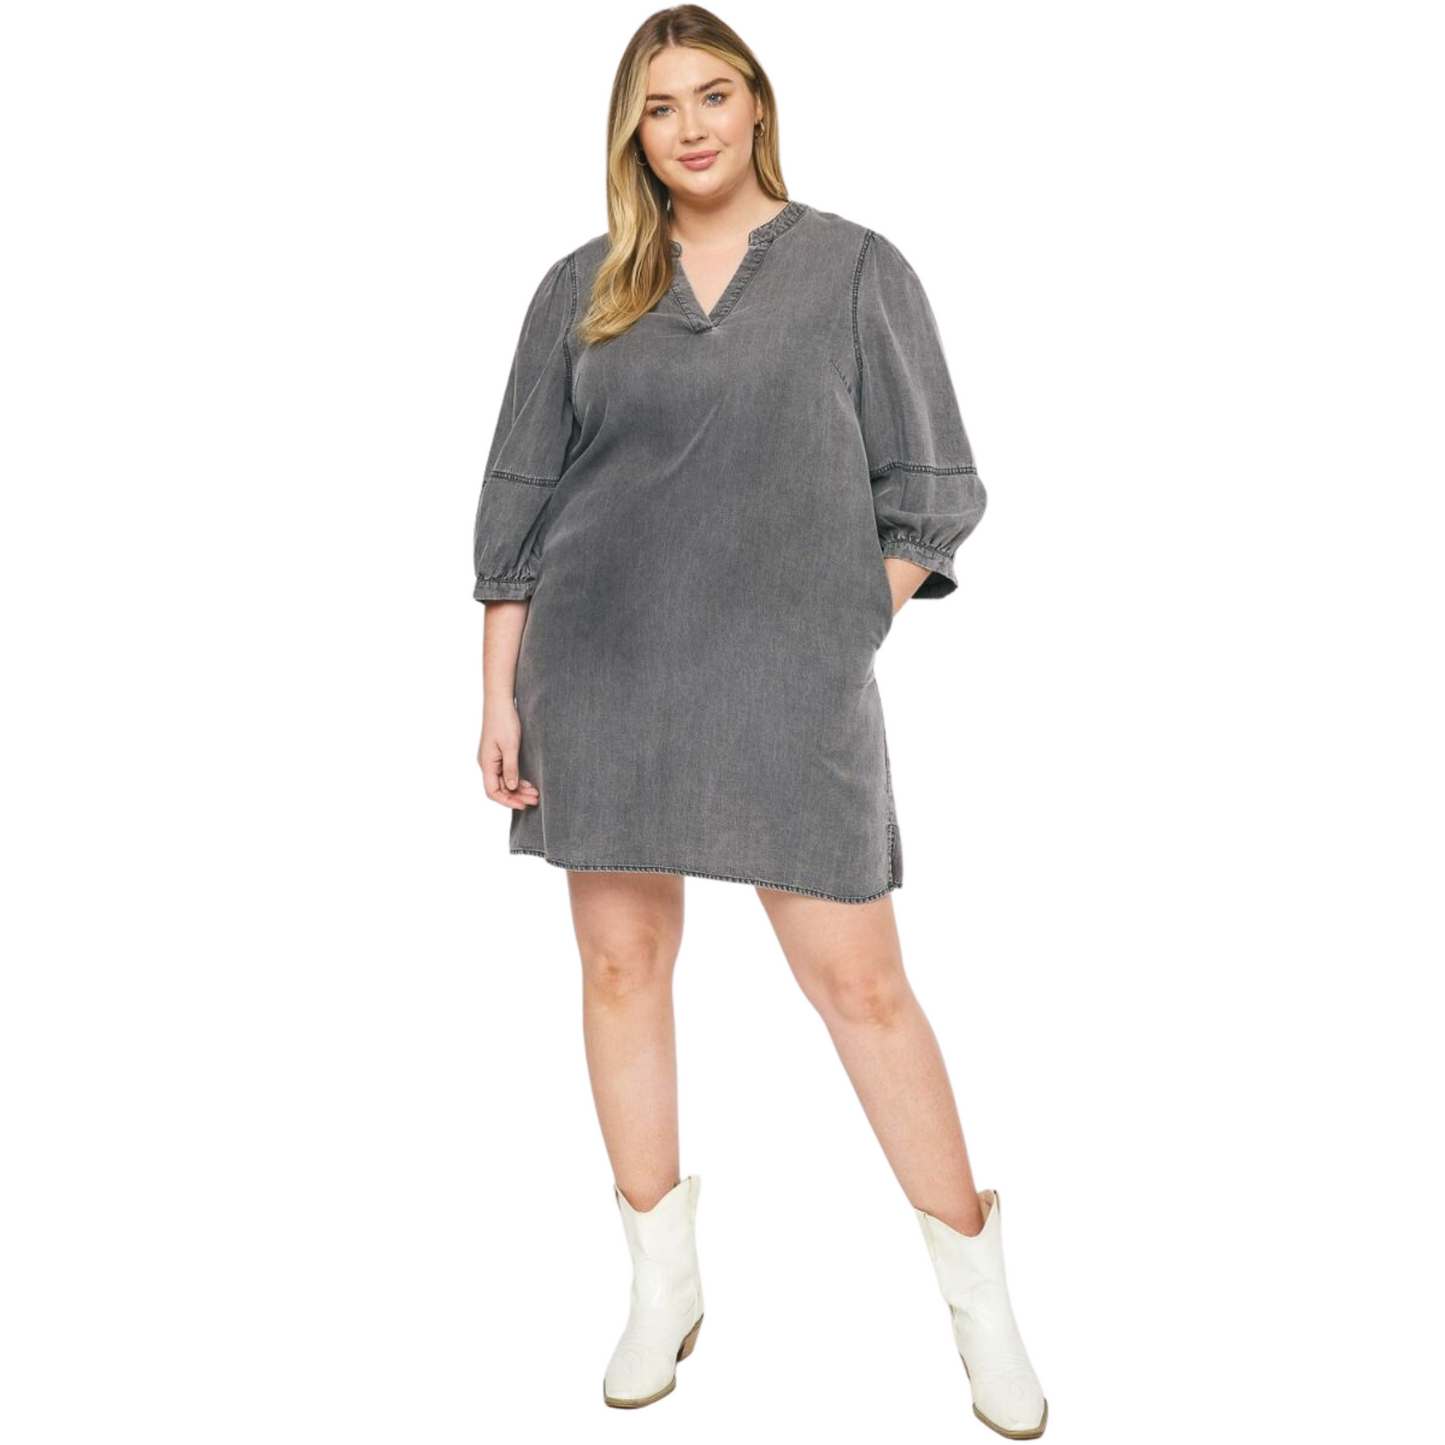 This Washed Denim Mini Dress is the perfect outfit for any season. Crafted from lightweight, woven fabric and washed denim, this 3/4 sleeve v-neck dress features side pockets and split detail at the side hem for comfortable and fashionable wear. Unlined for a natural fit. Non-sheer.